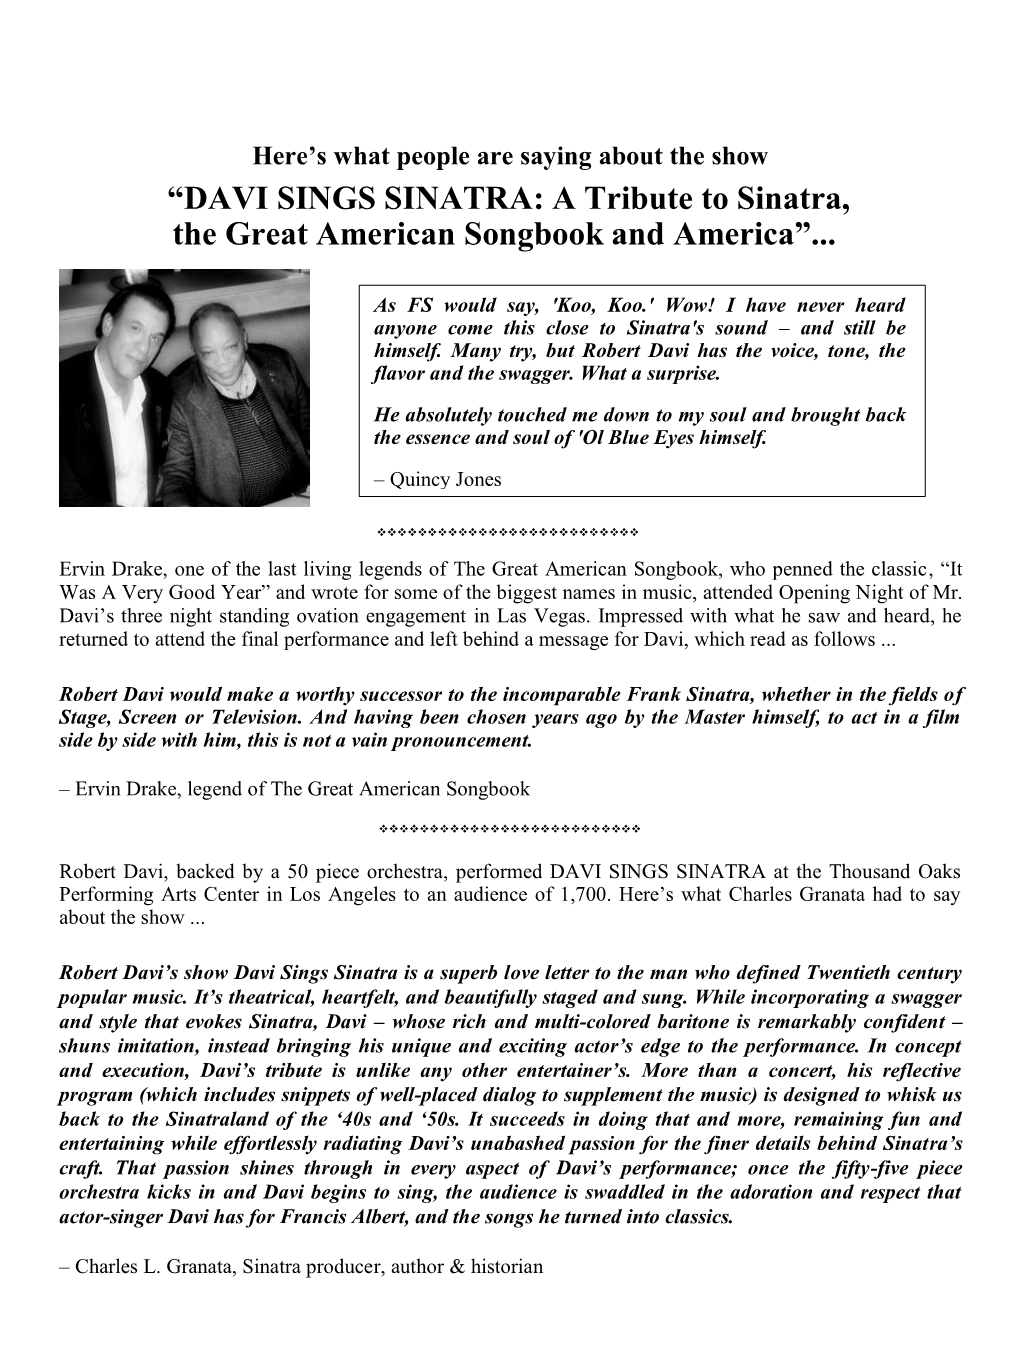 “DAVI SINGS SINATRA: a Tribute to Sinatra, the Great American Songbook and America”